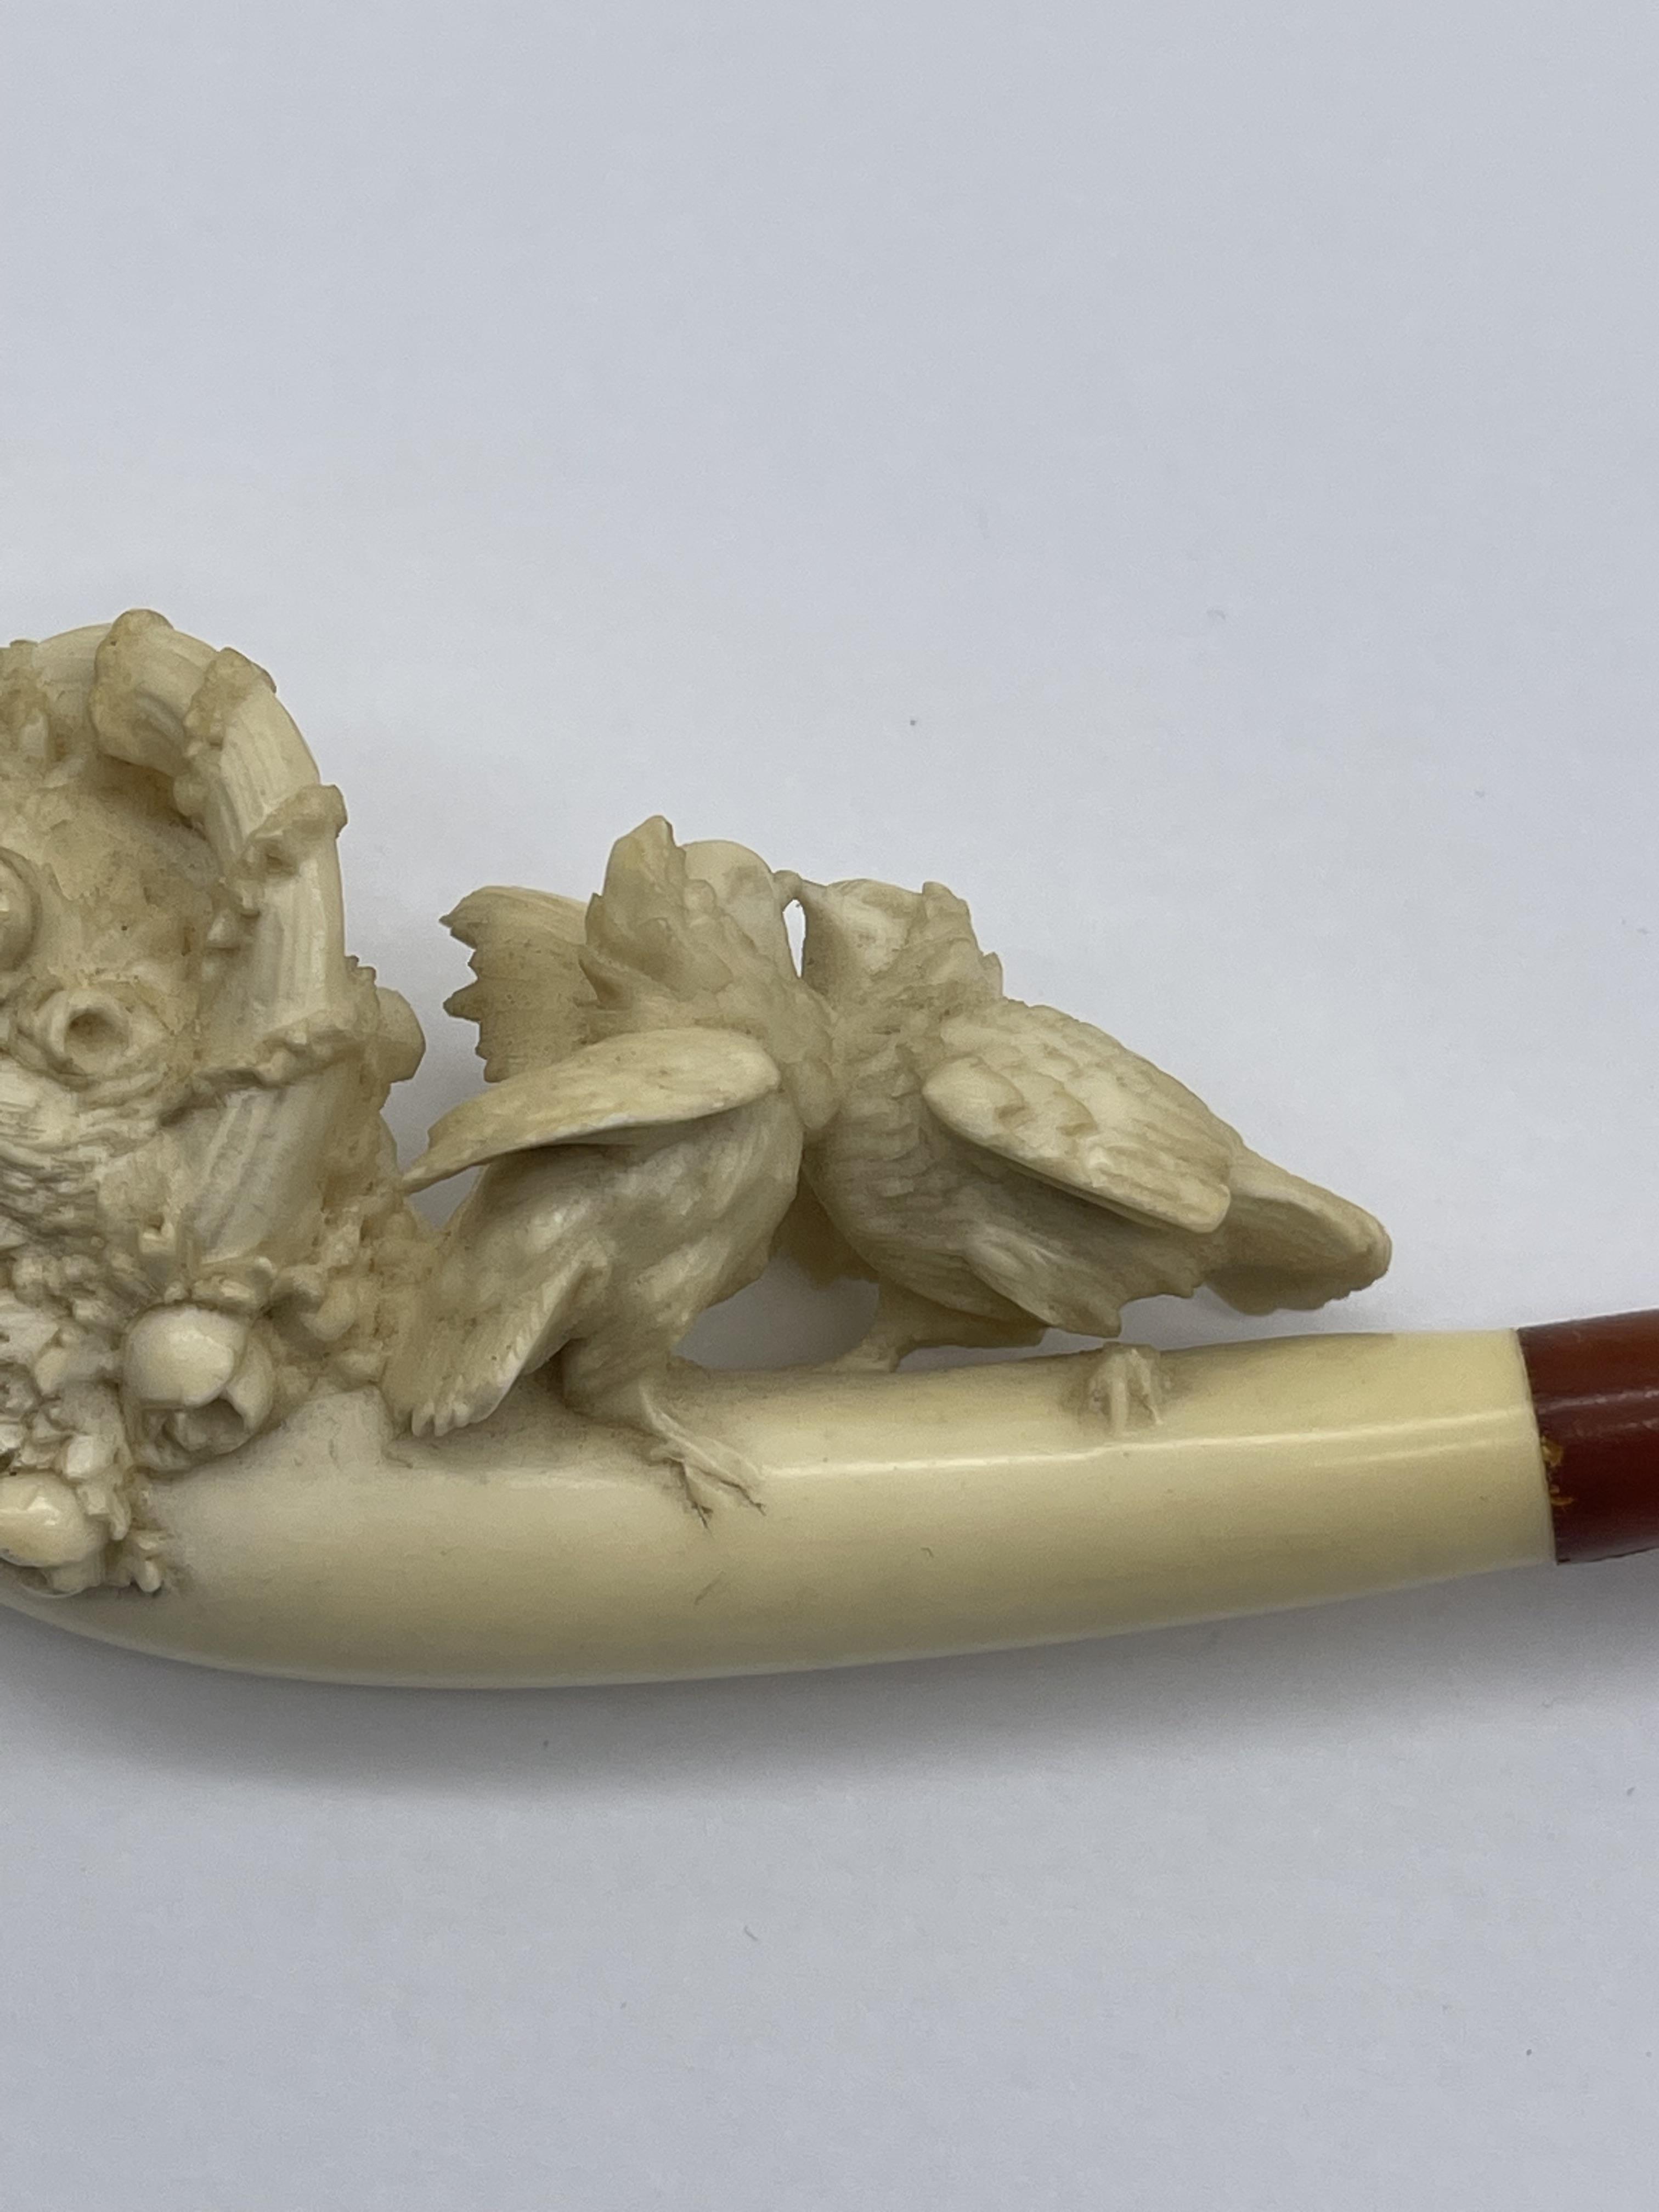 Cased, Beautifully Carved Meerschaum Pipe by S.W. - Image 4 of 12